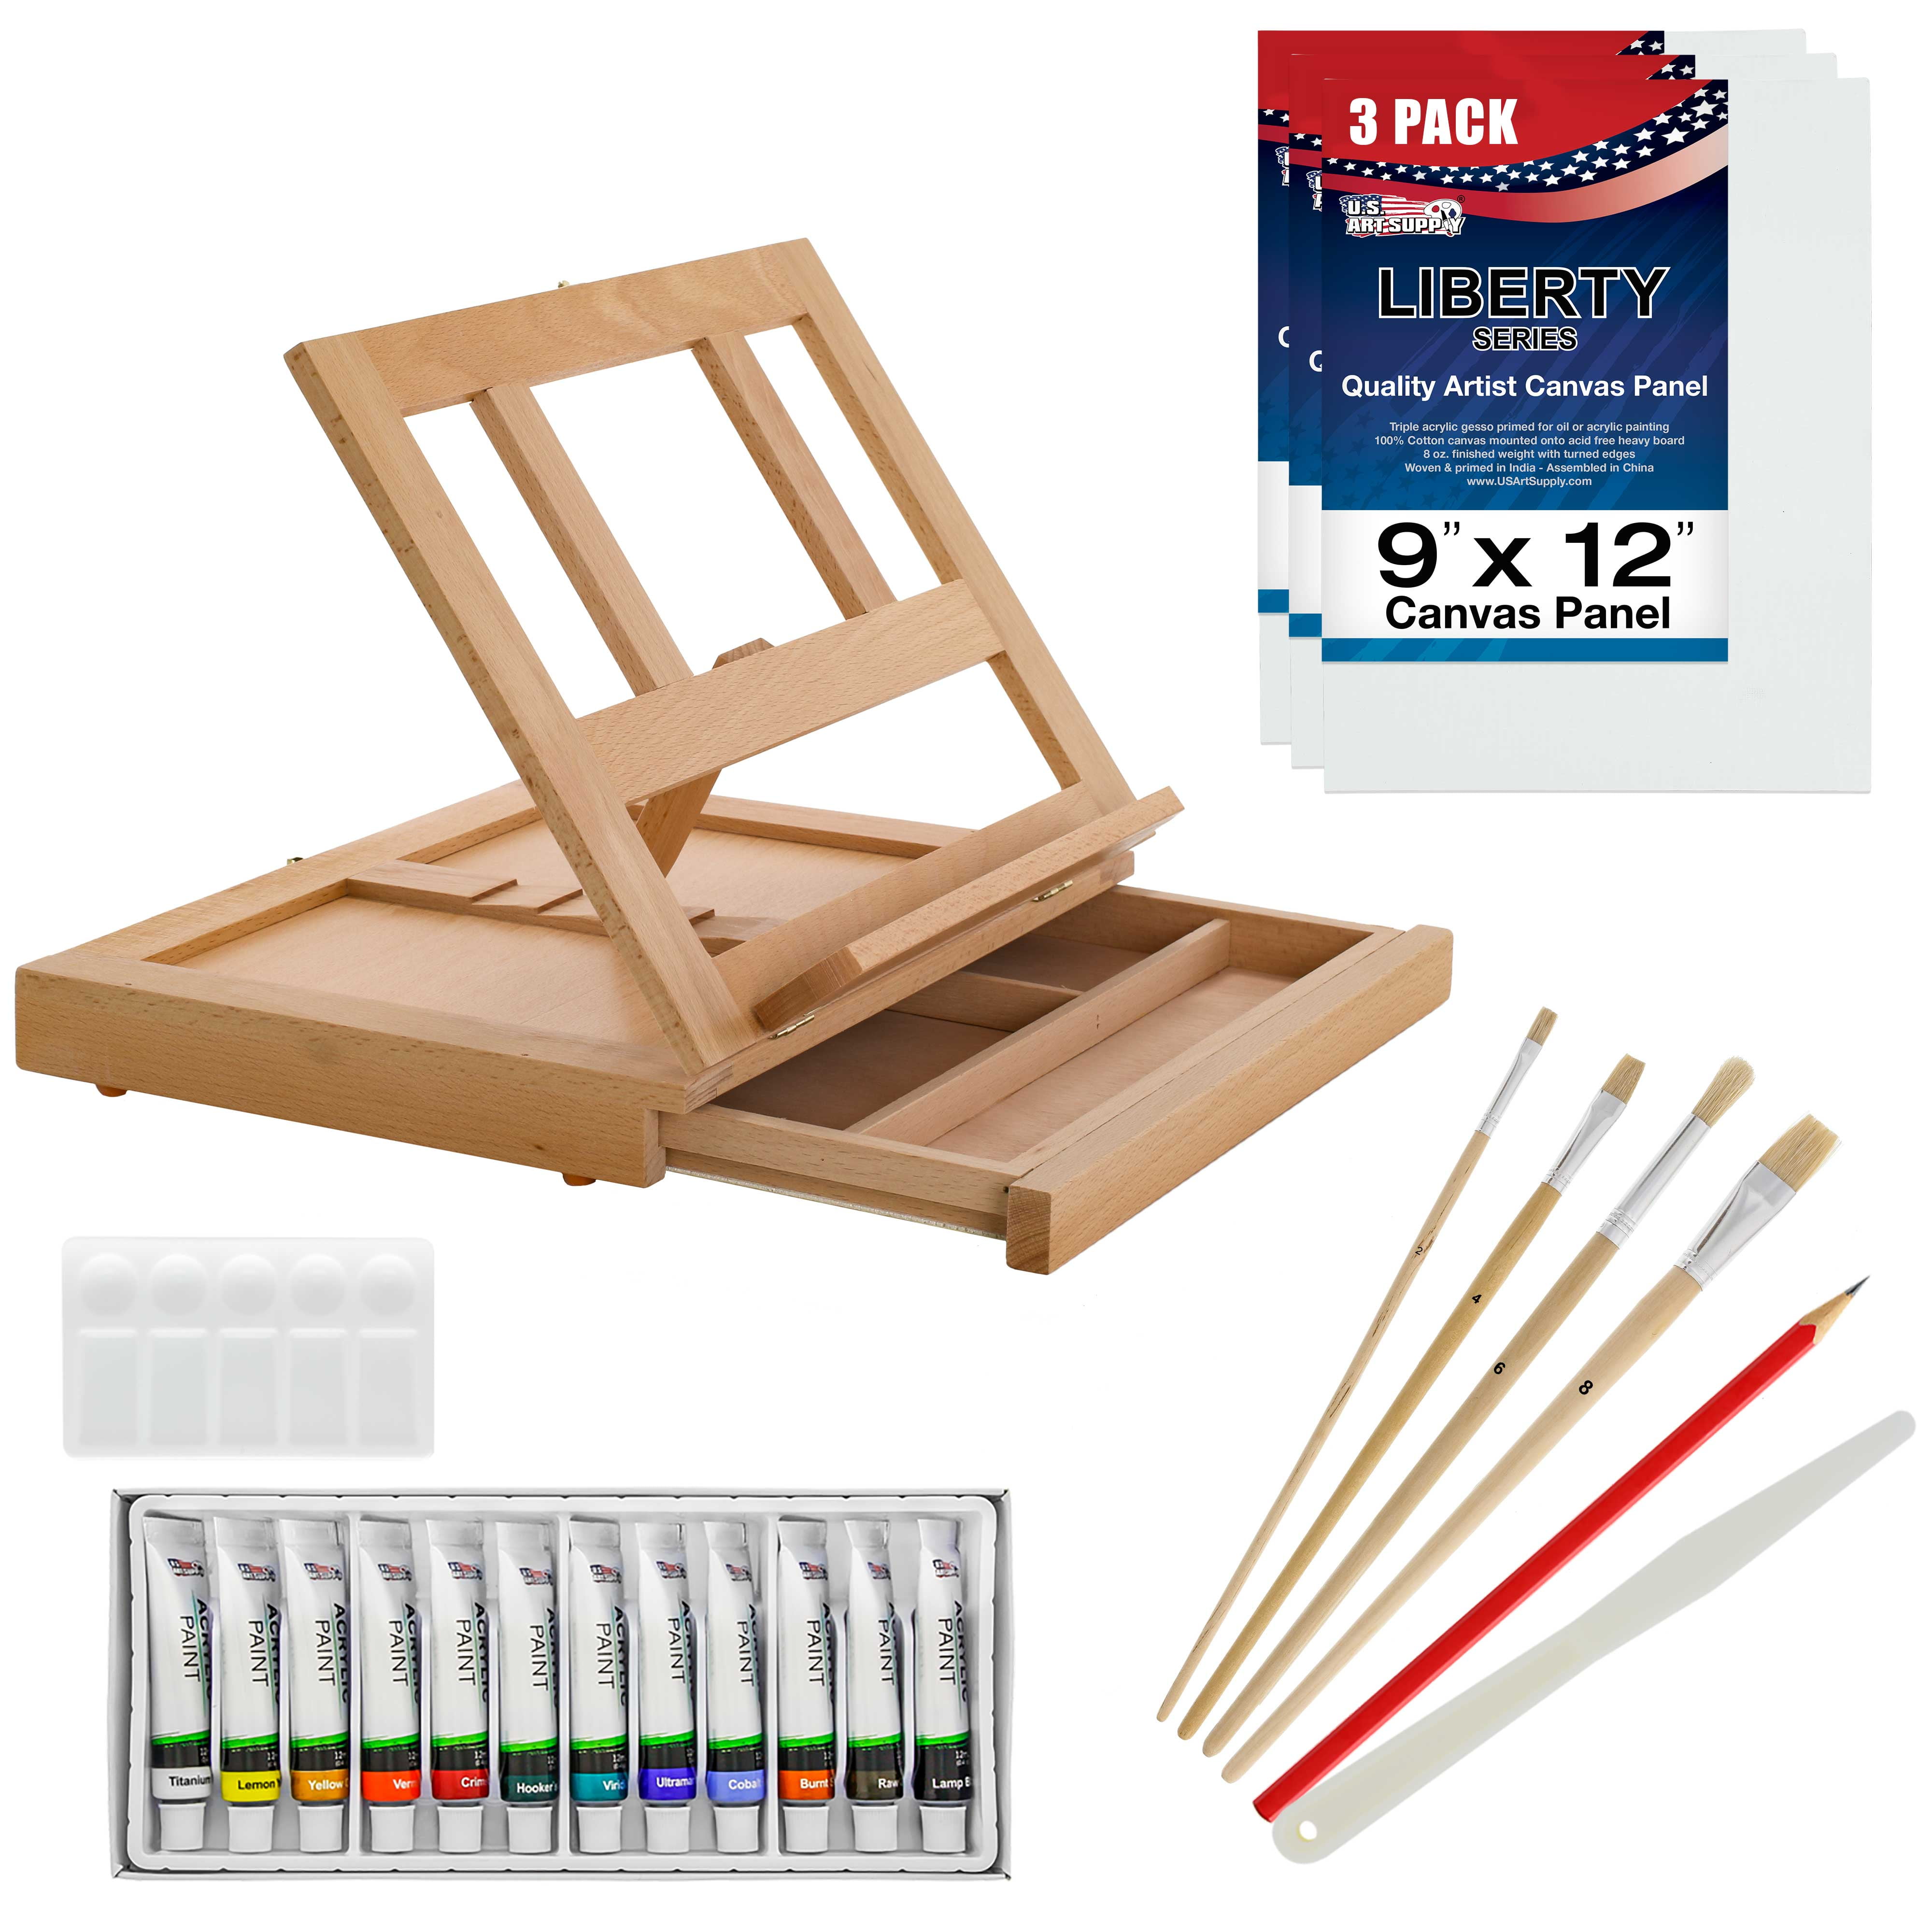 U.S. Art Supply 39-Piece Complete Artist Painting Set with Easel - 12 Vivid  Acrylic Paint Colors, 22 Brushes, 2 Stretched Canvas, Painting Palette -  Kids, Students, Adults Kit - Color Mixing Wheel 